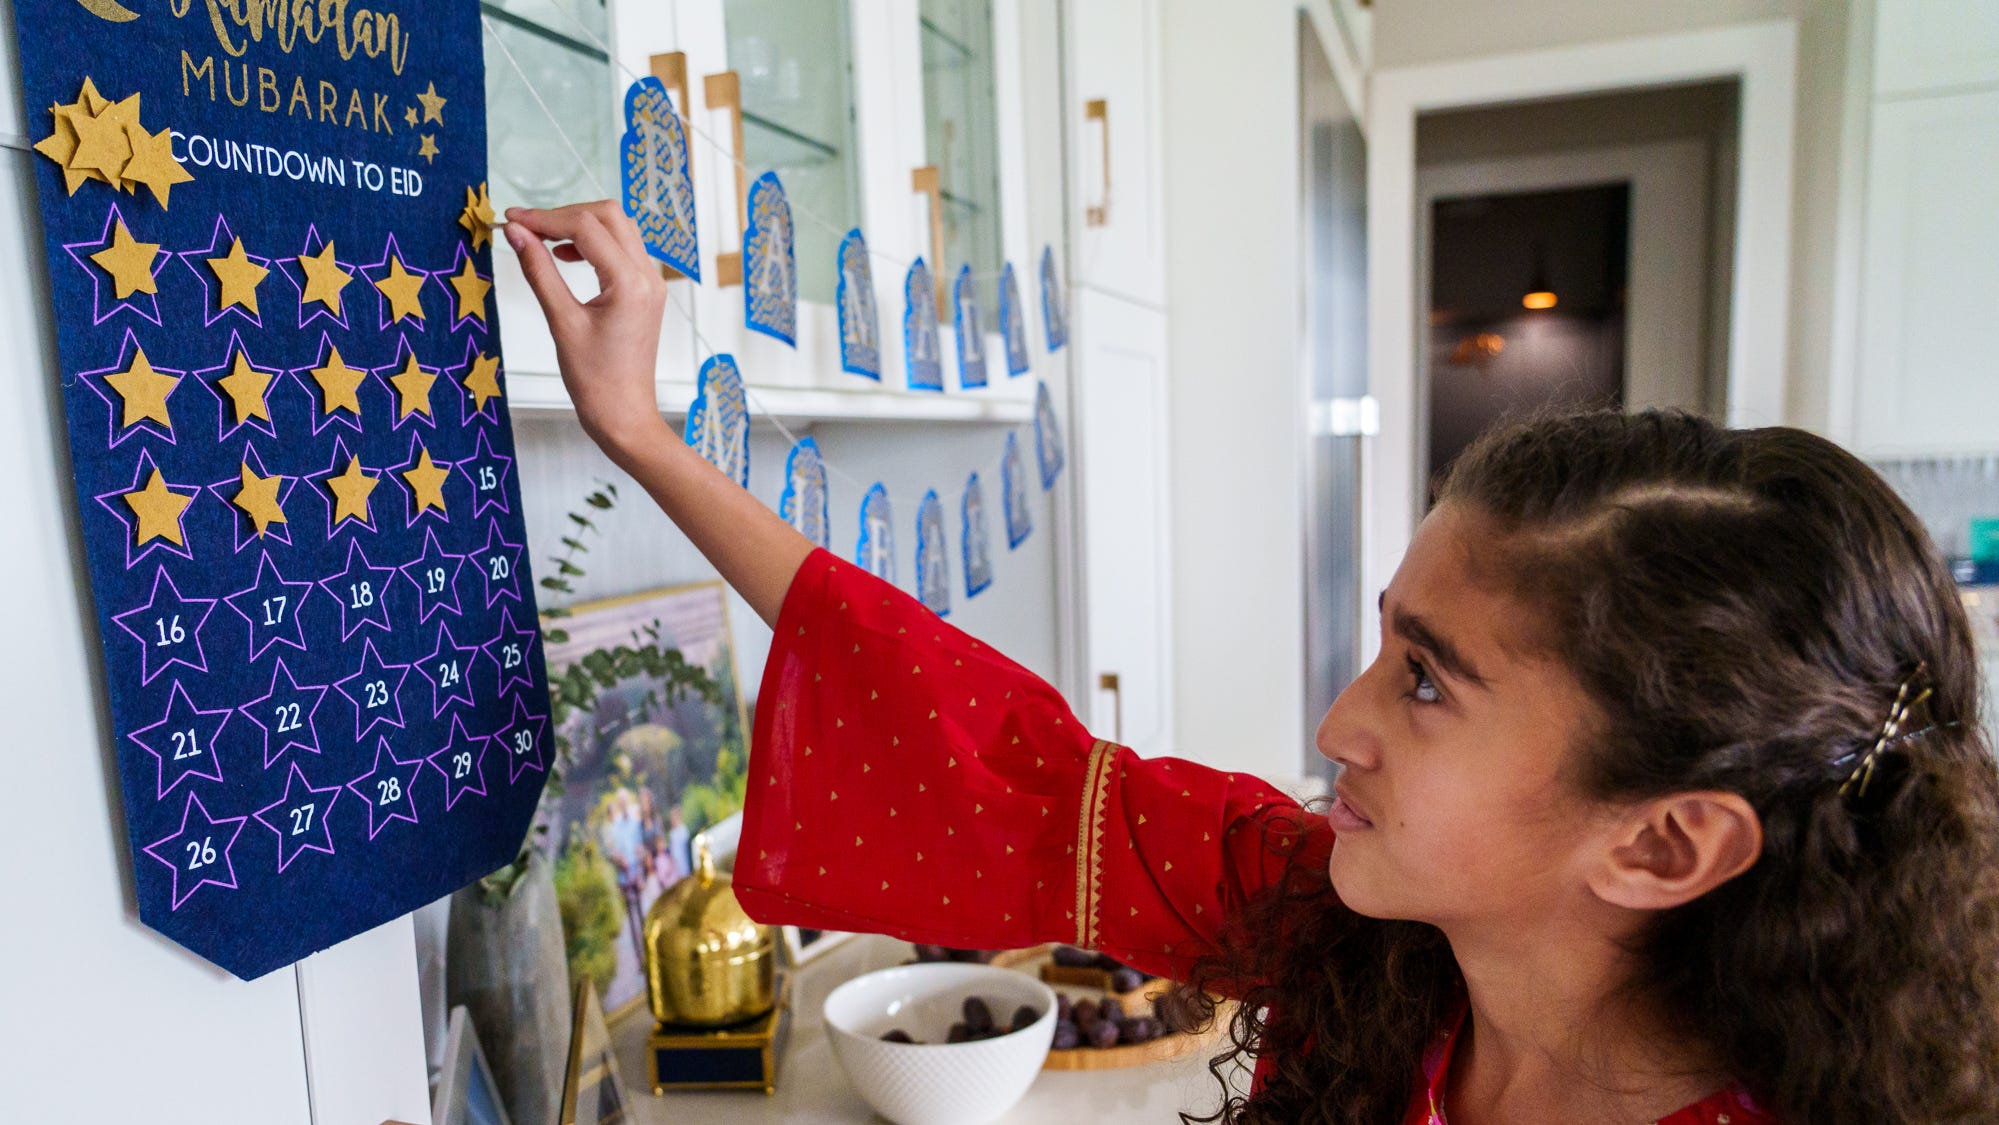 317 Project: 10-year-old girl champions her first 13-hour fast celebrating Ramadan